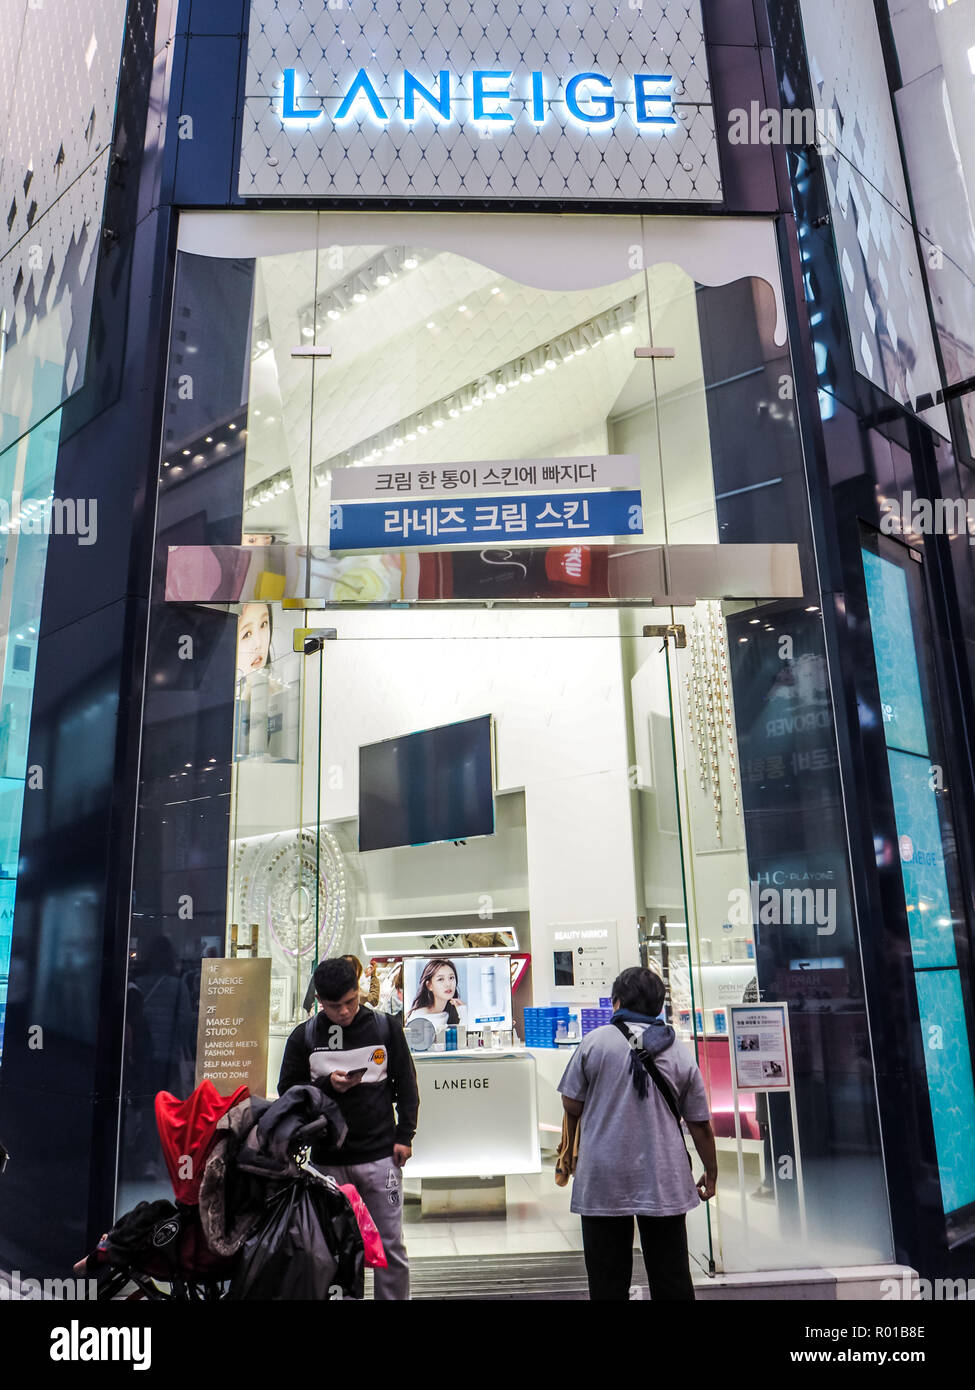 October 2018 - Seoul, South Korea: Flagship store of the South Korean skincare brand Laneige, owned by Amore Pacific, in Myeongdong shopping district Stock Photo